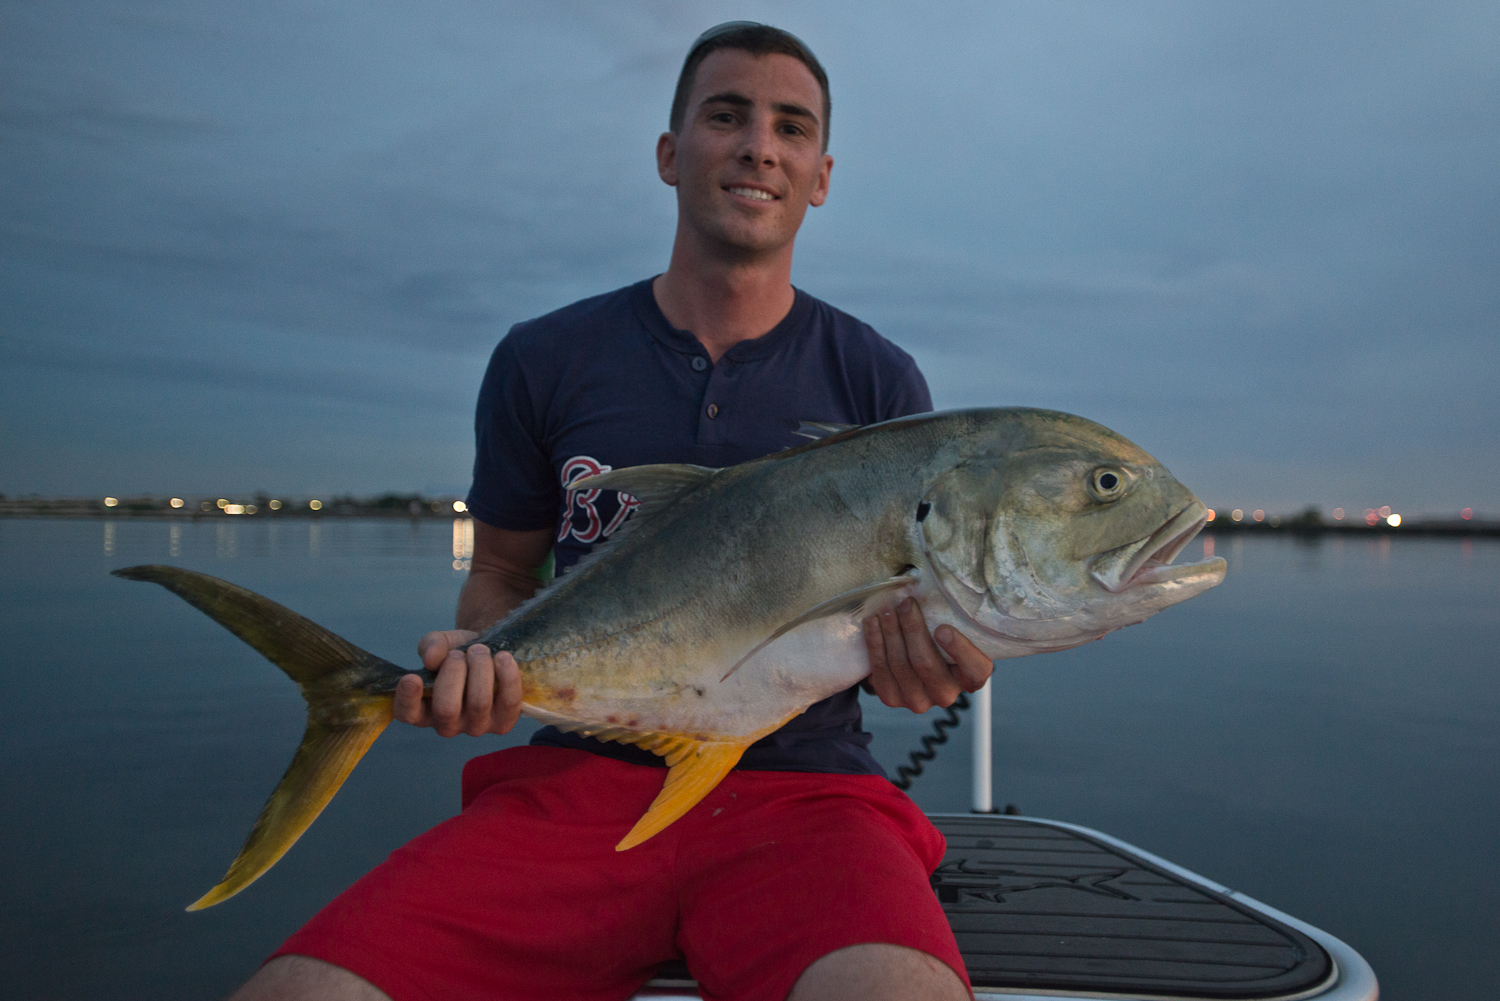 Southern-Fly-Expeditions-CodyVollmer-JackCrevalle-02Sep2015-2.jpg